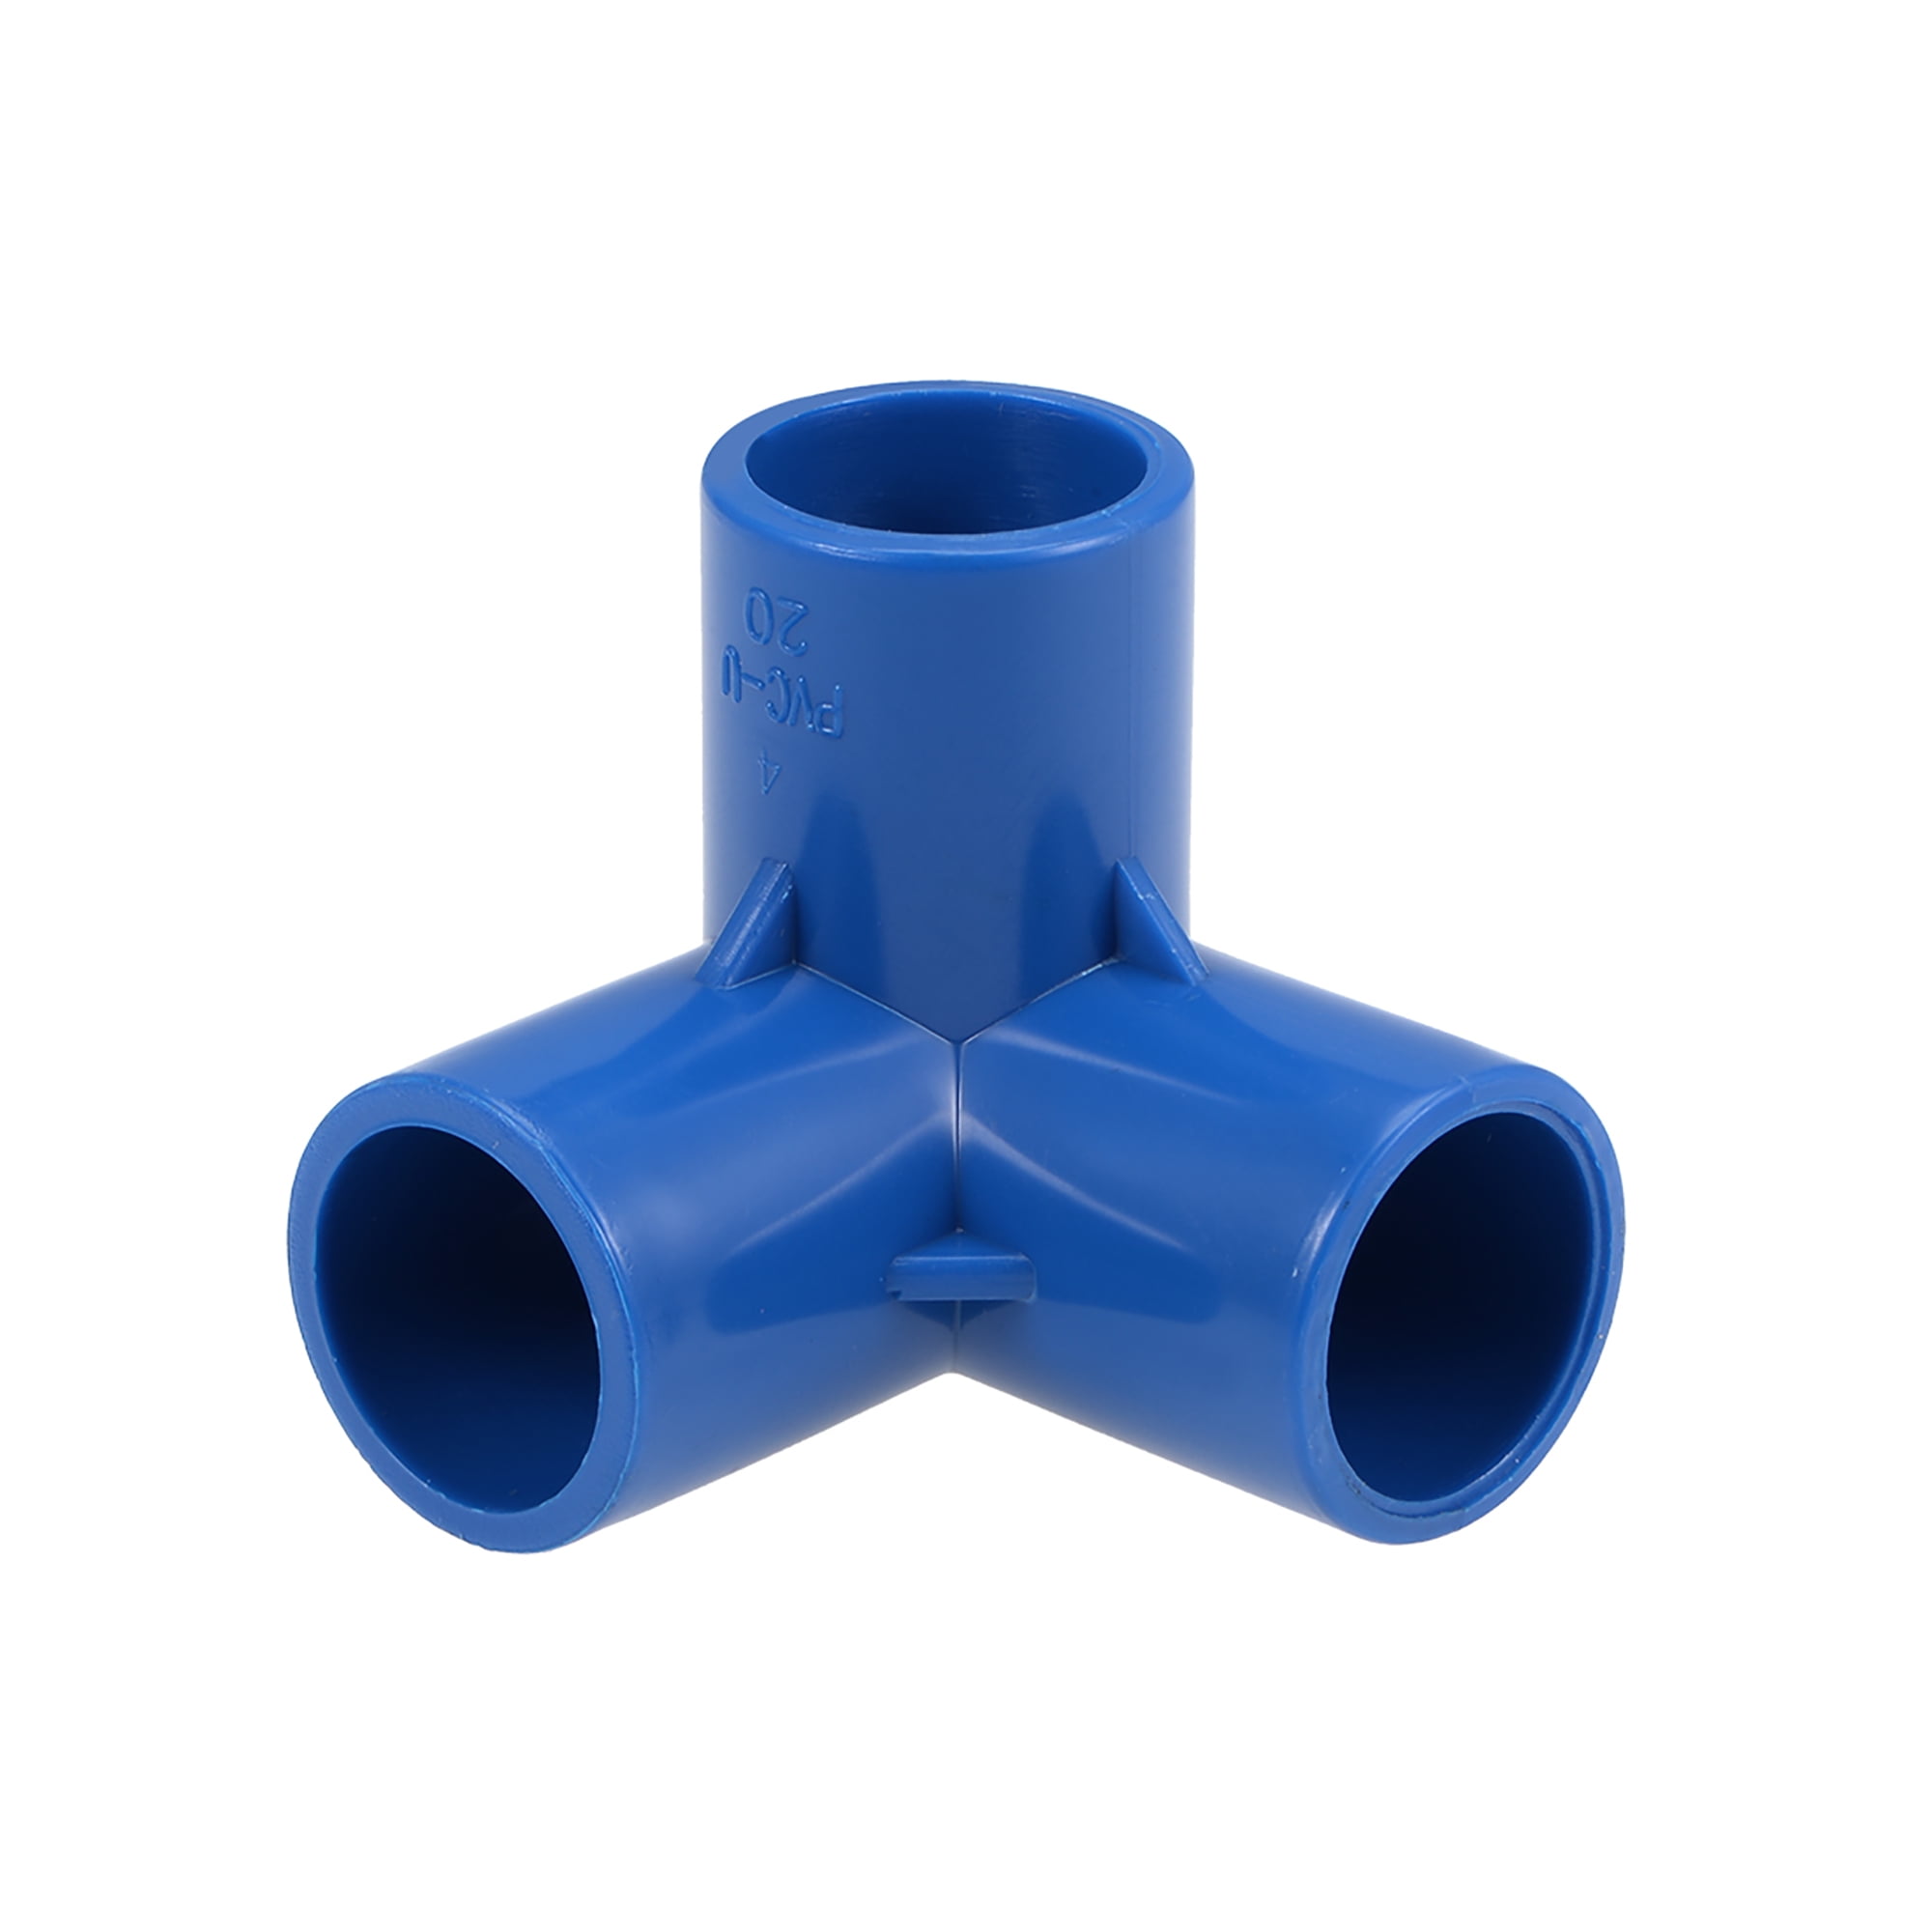 4 Way PVC 1/2 PVC Elbow Fittings 10pack Build Heavy Duty PVC Furniture 3 Way PVC Corner Fitting 1/23/4 1 PVC Elbow Corner Side Outlet Tee Fitting PVC 3Way 1/2 in Tee PVC Fitting Elbow 